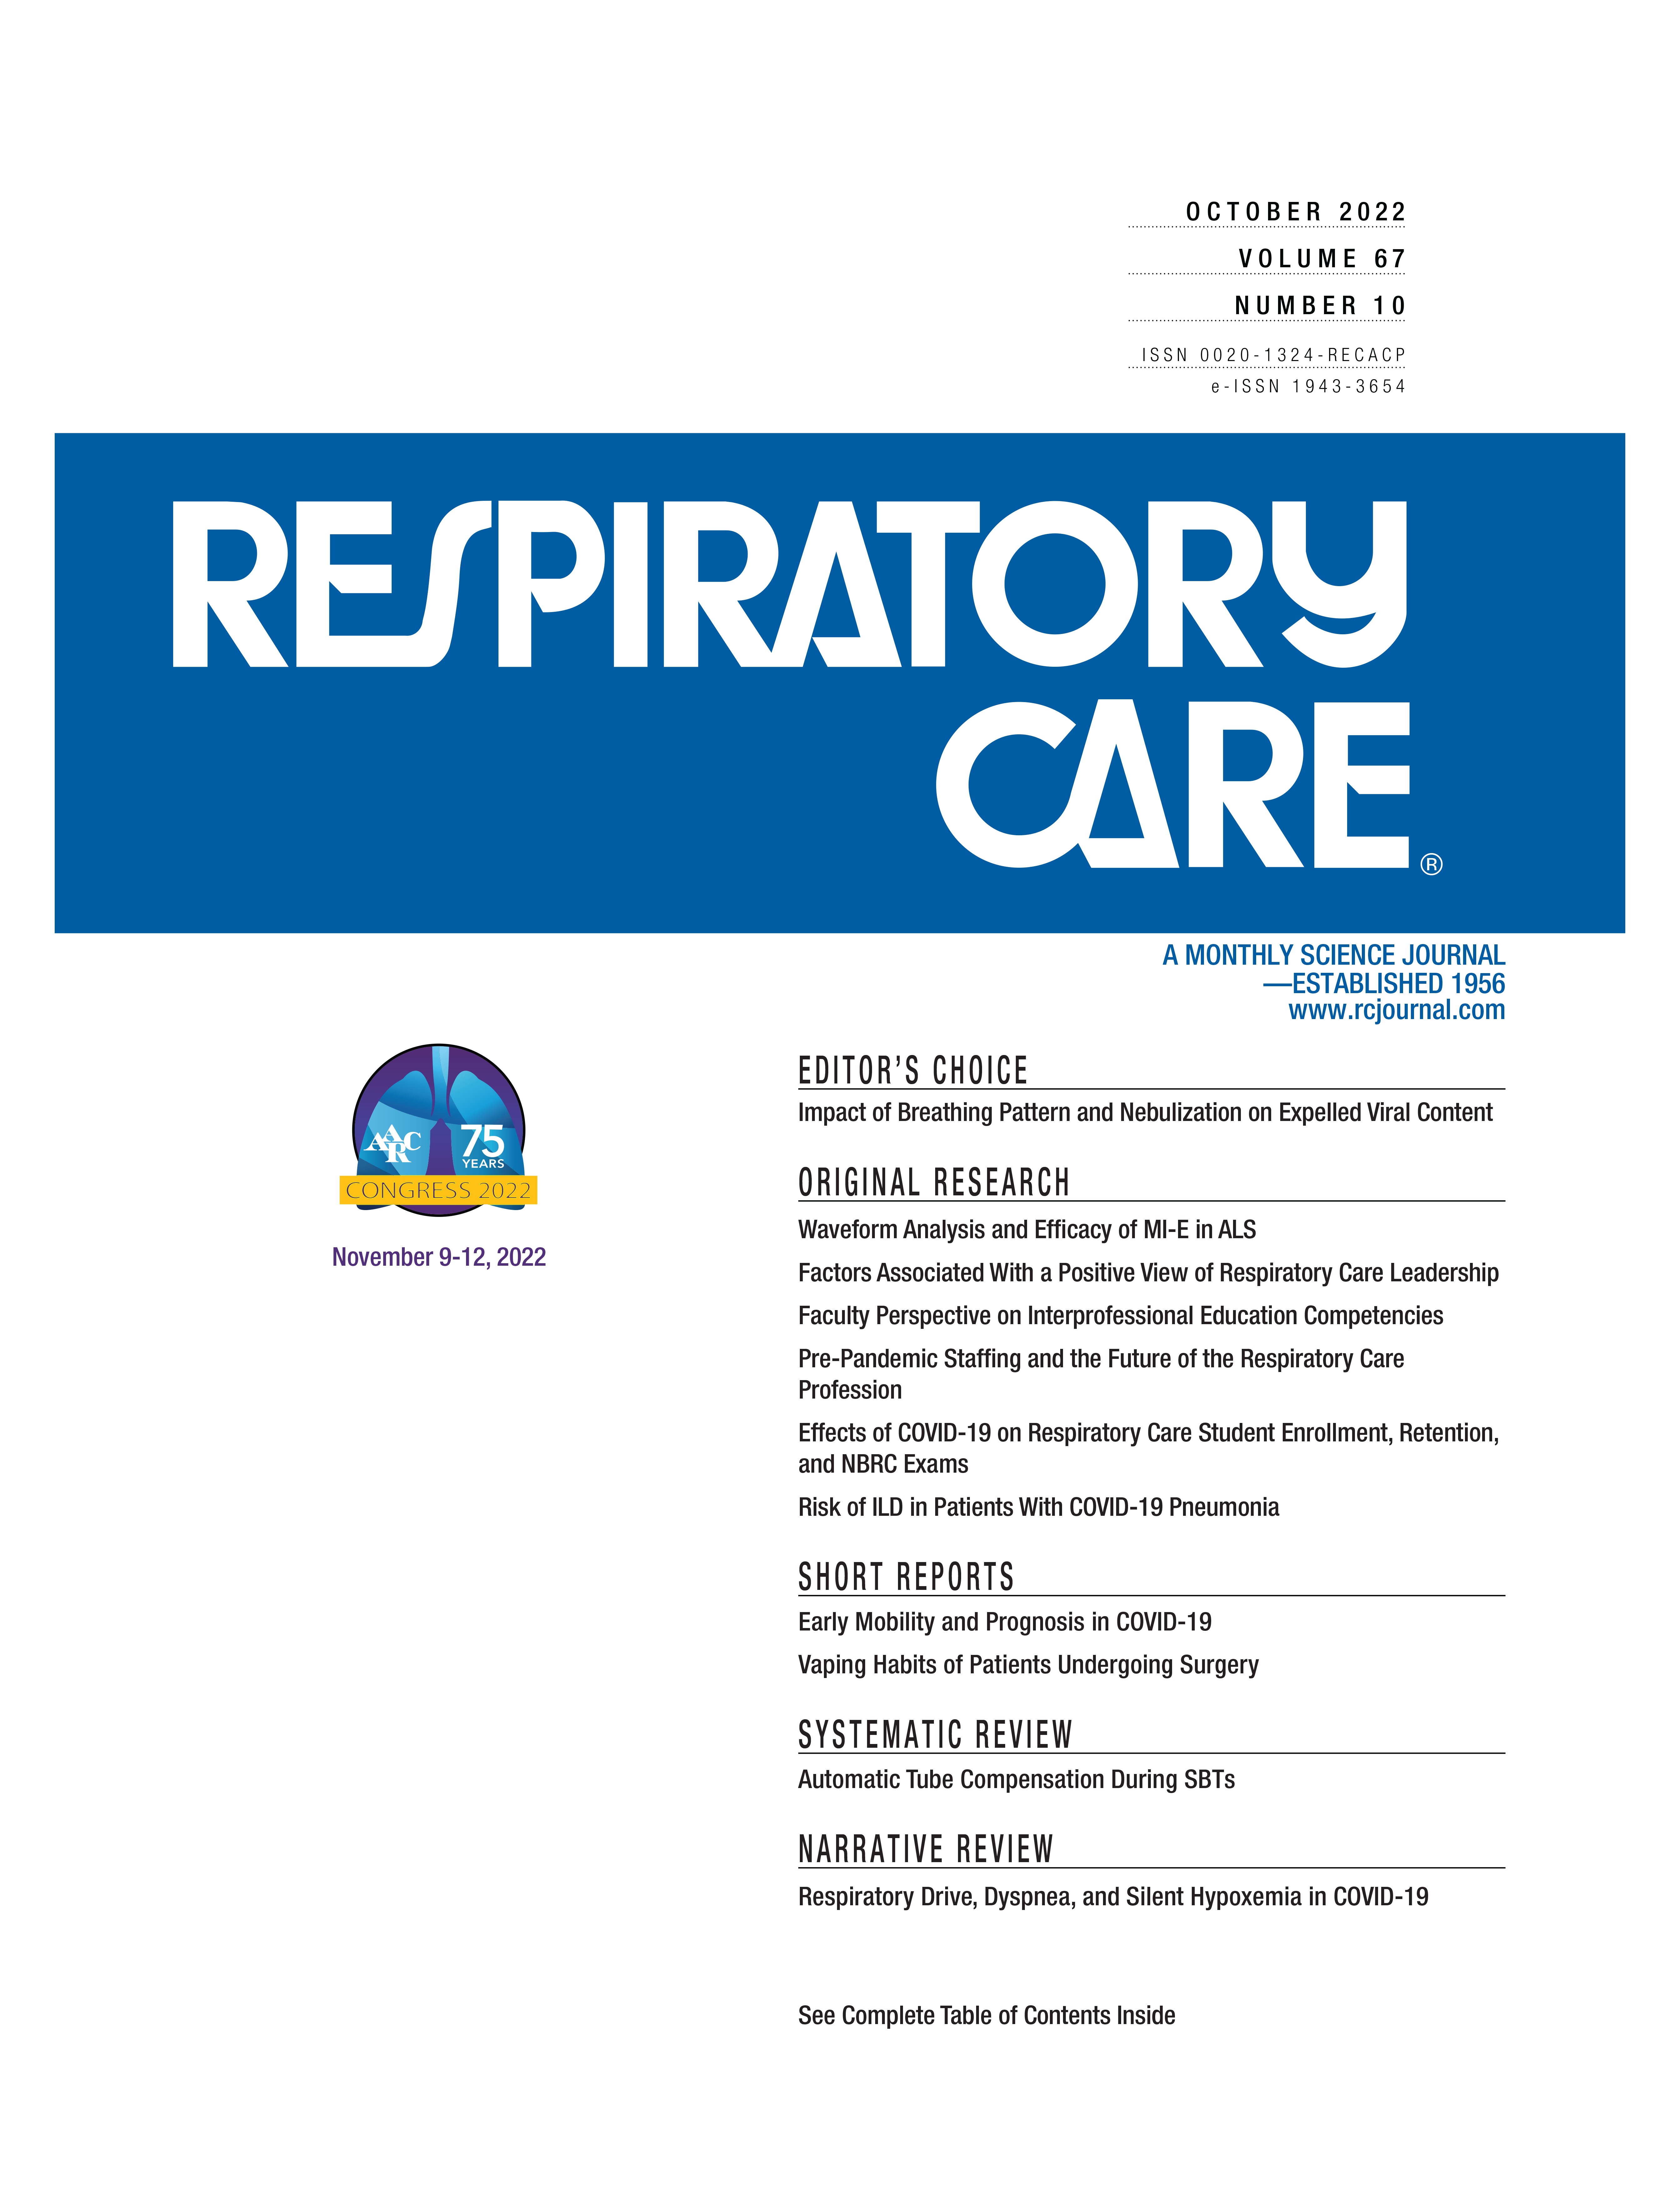 Identification and Prevention of Extubation Failure by Using an Automated Continuous Monitoring Alert Versus Standard Care